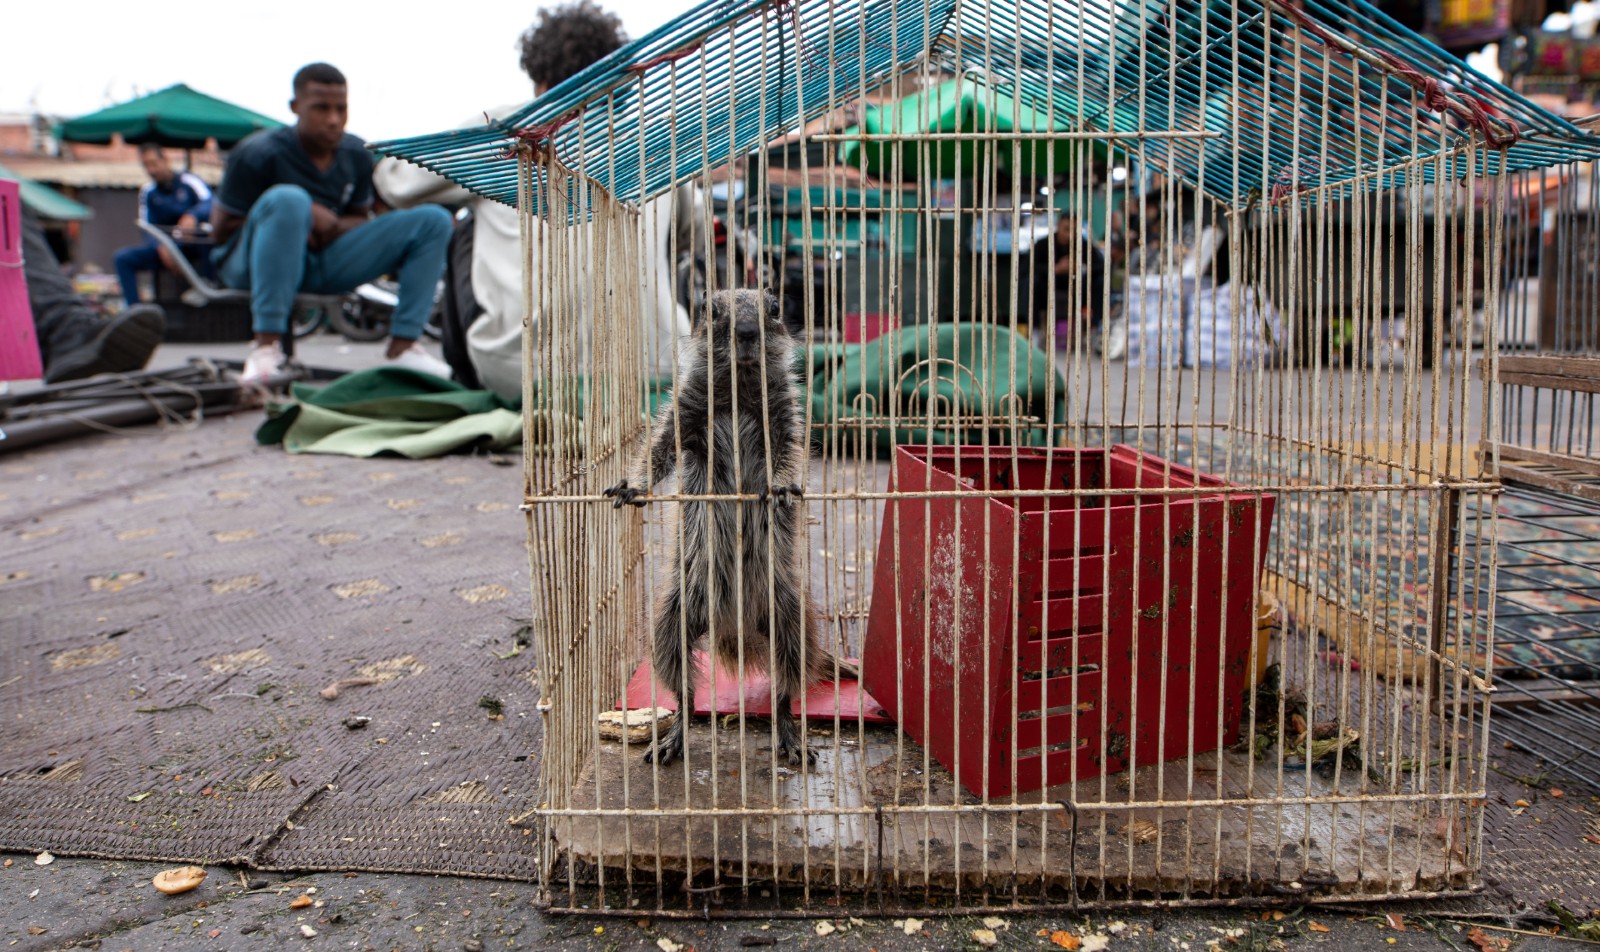 A small animal in a cage at a wildlife market